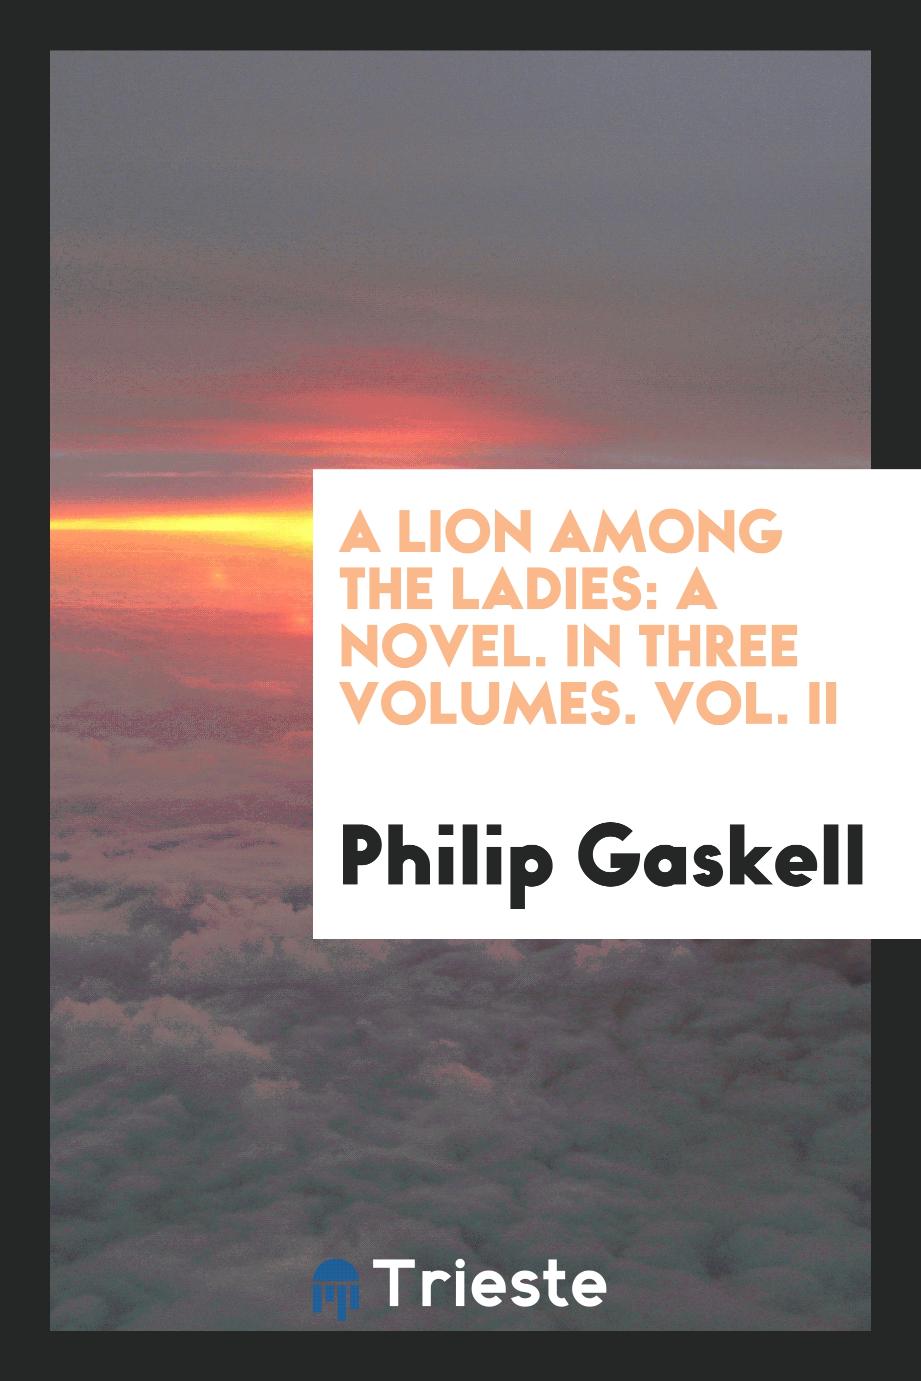 A Lion Among the Ladies: A Novel. In Three Volumes. Vol. II